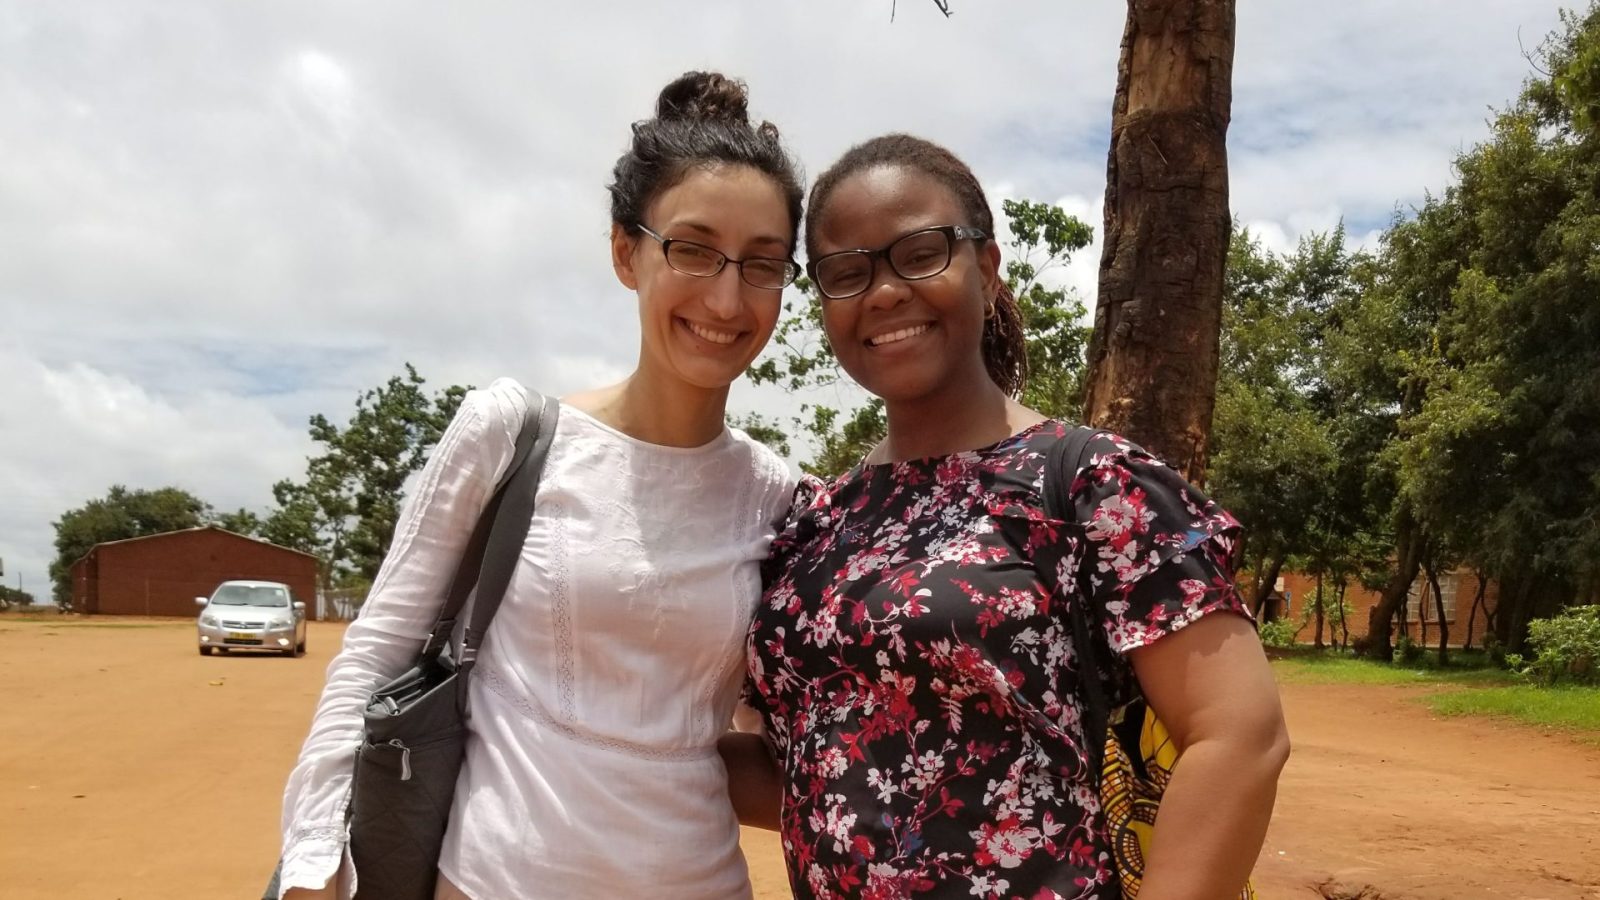 Foluyinka and her GHD Capstone partner standing outside in Malawi